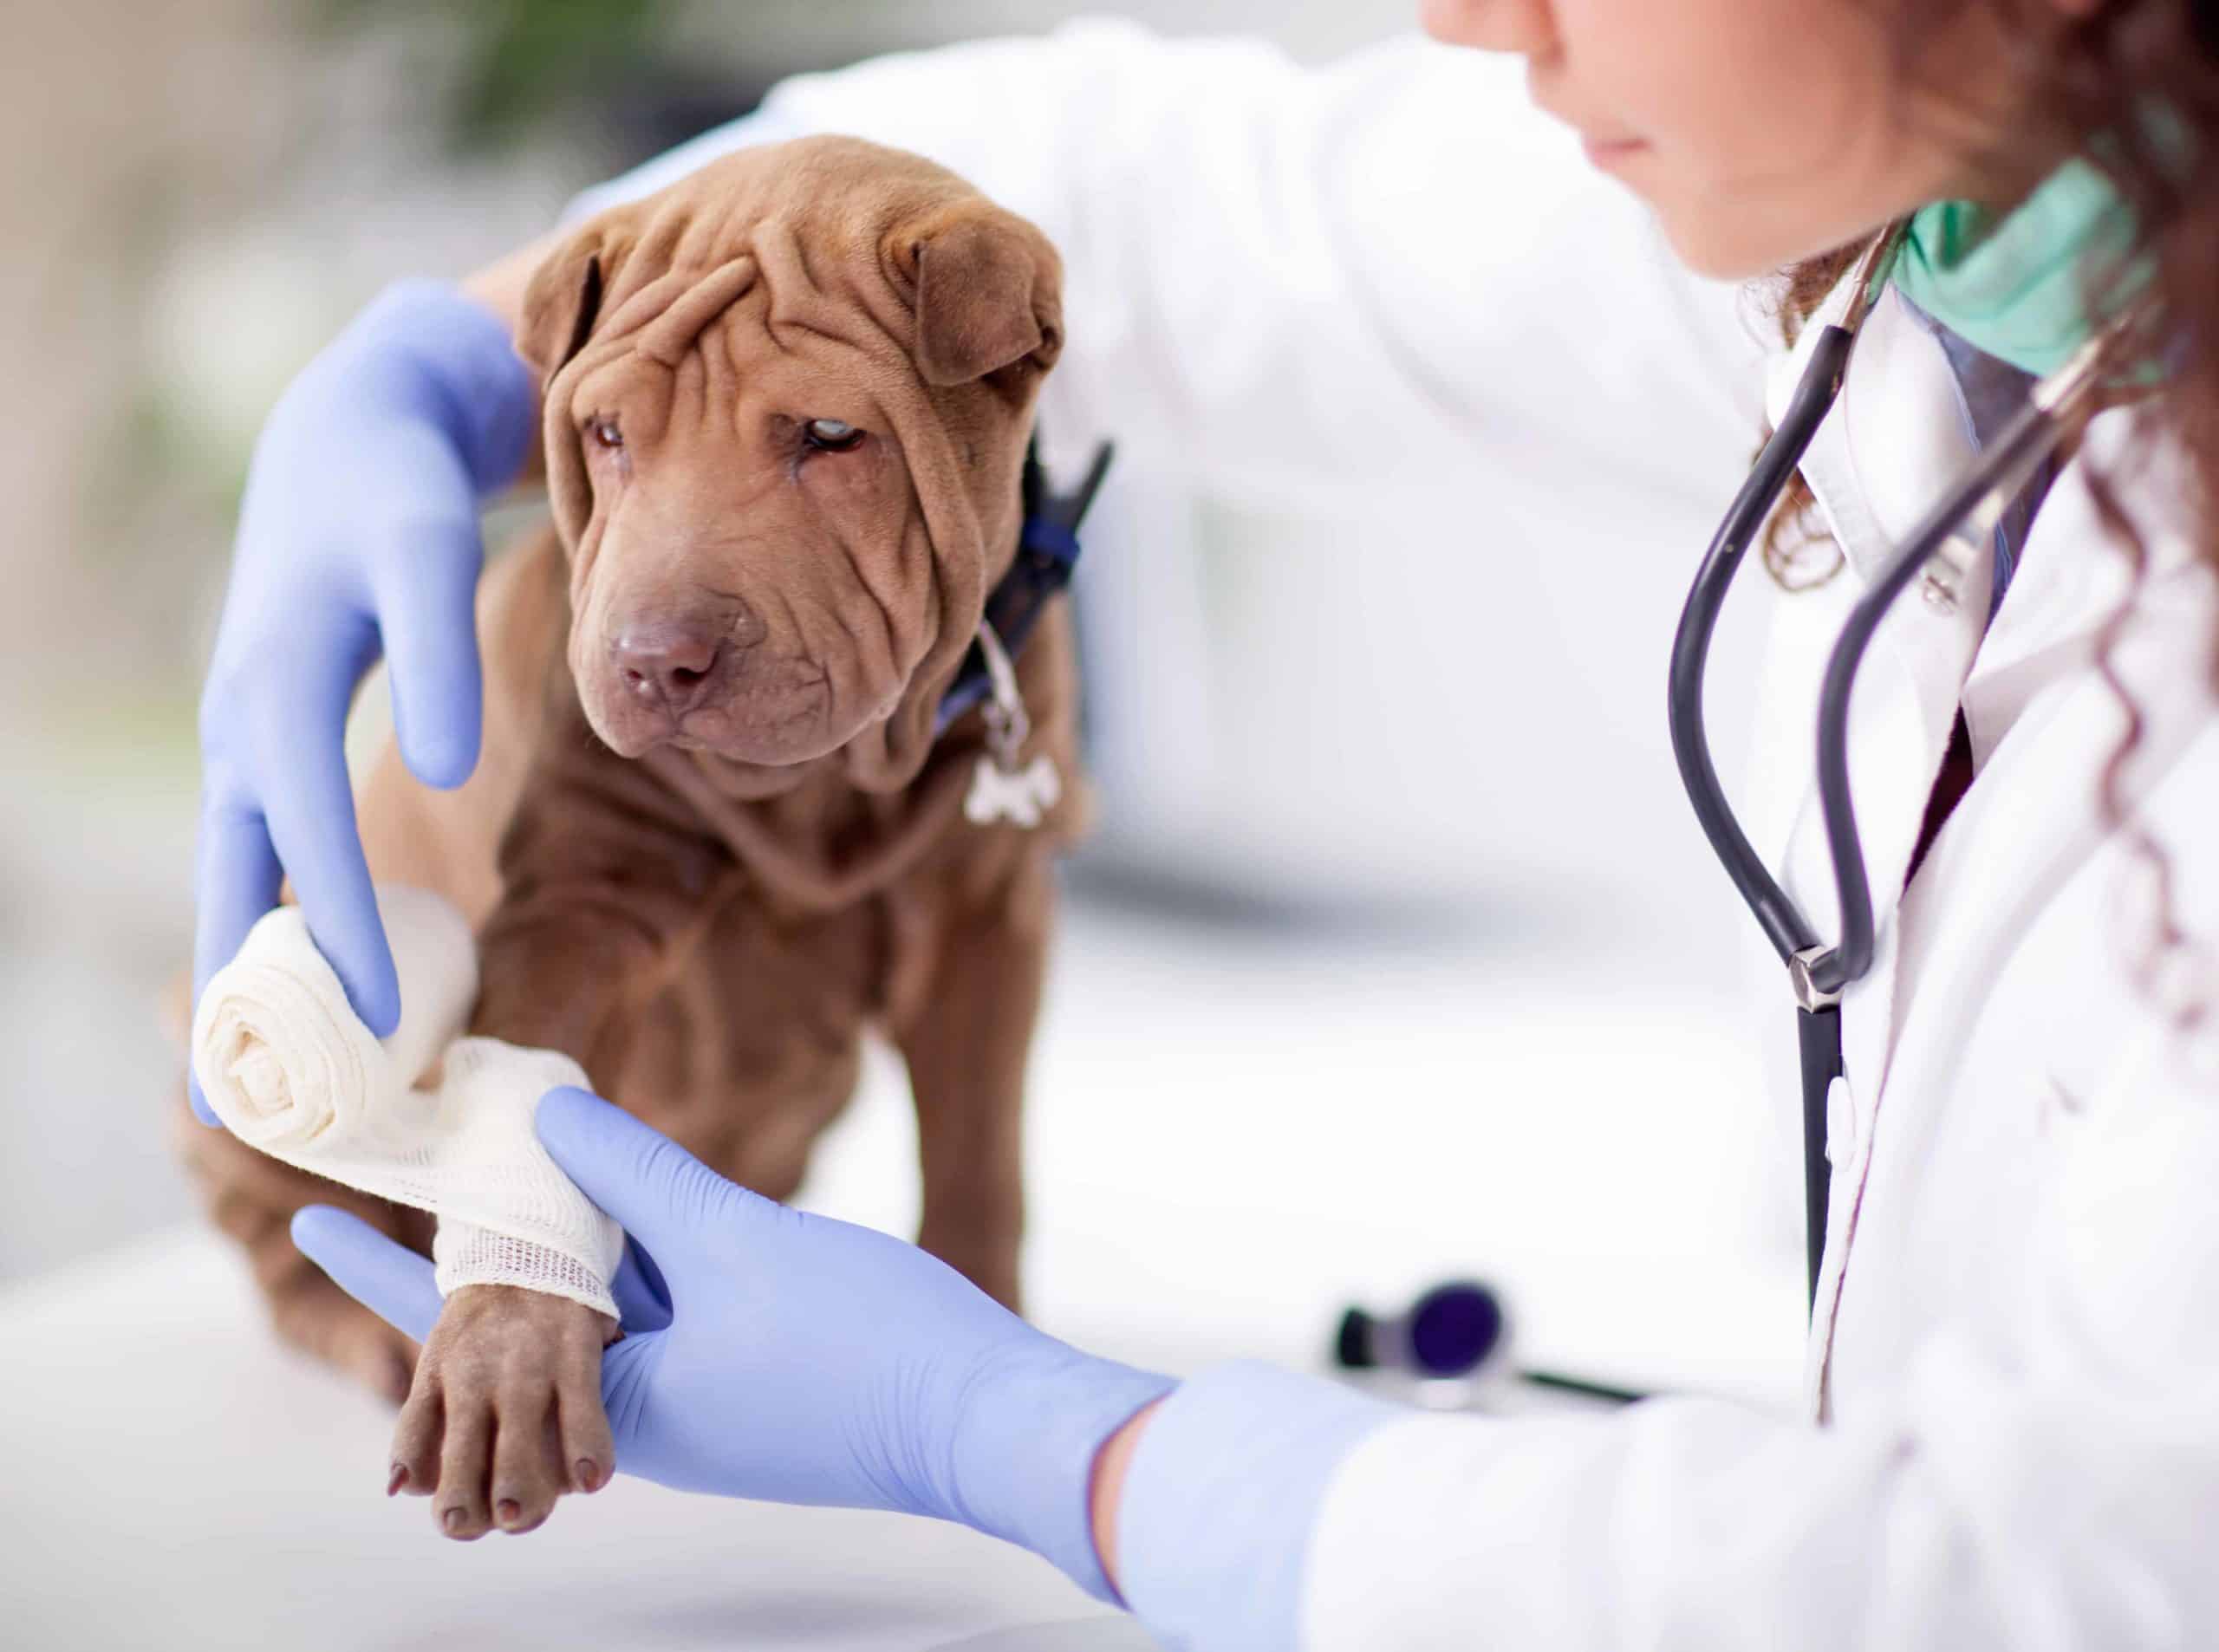 Vet wraps paw of injured Shar Pei puppy. If your dog is in an accident, assess your dog's injuries, and start first-aid. Take your dog to an emergency vet for serious injuries.